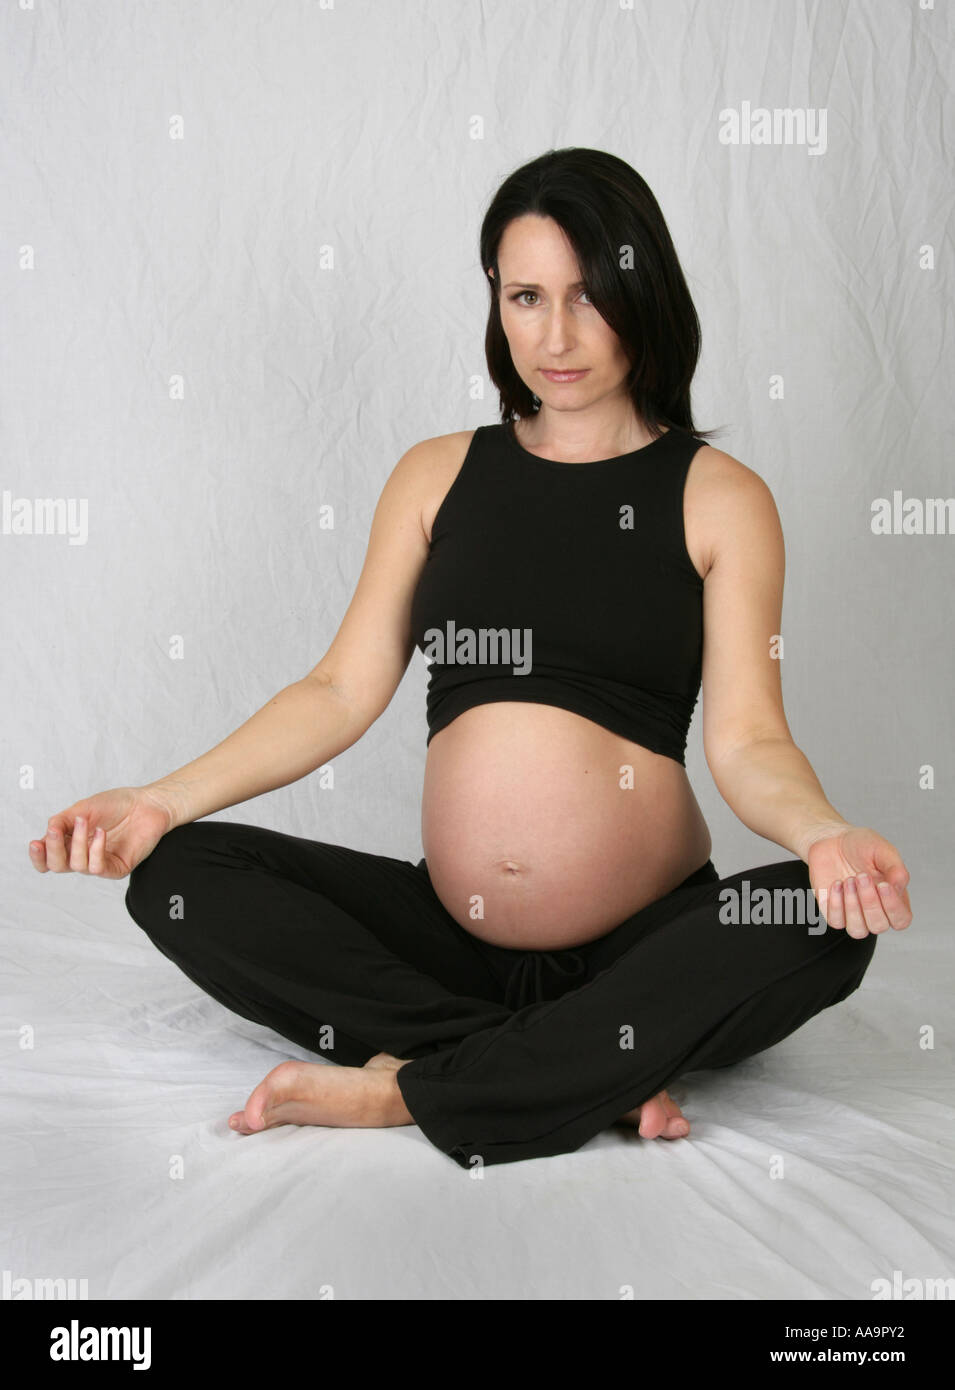 Pregnant Woman Wearing a Black Top and Trousers Doing Yoga Exercises Stock Photo